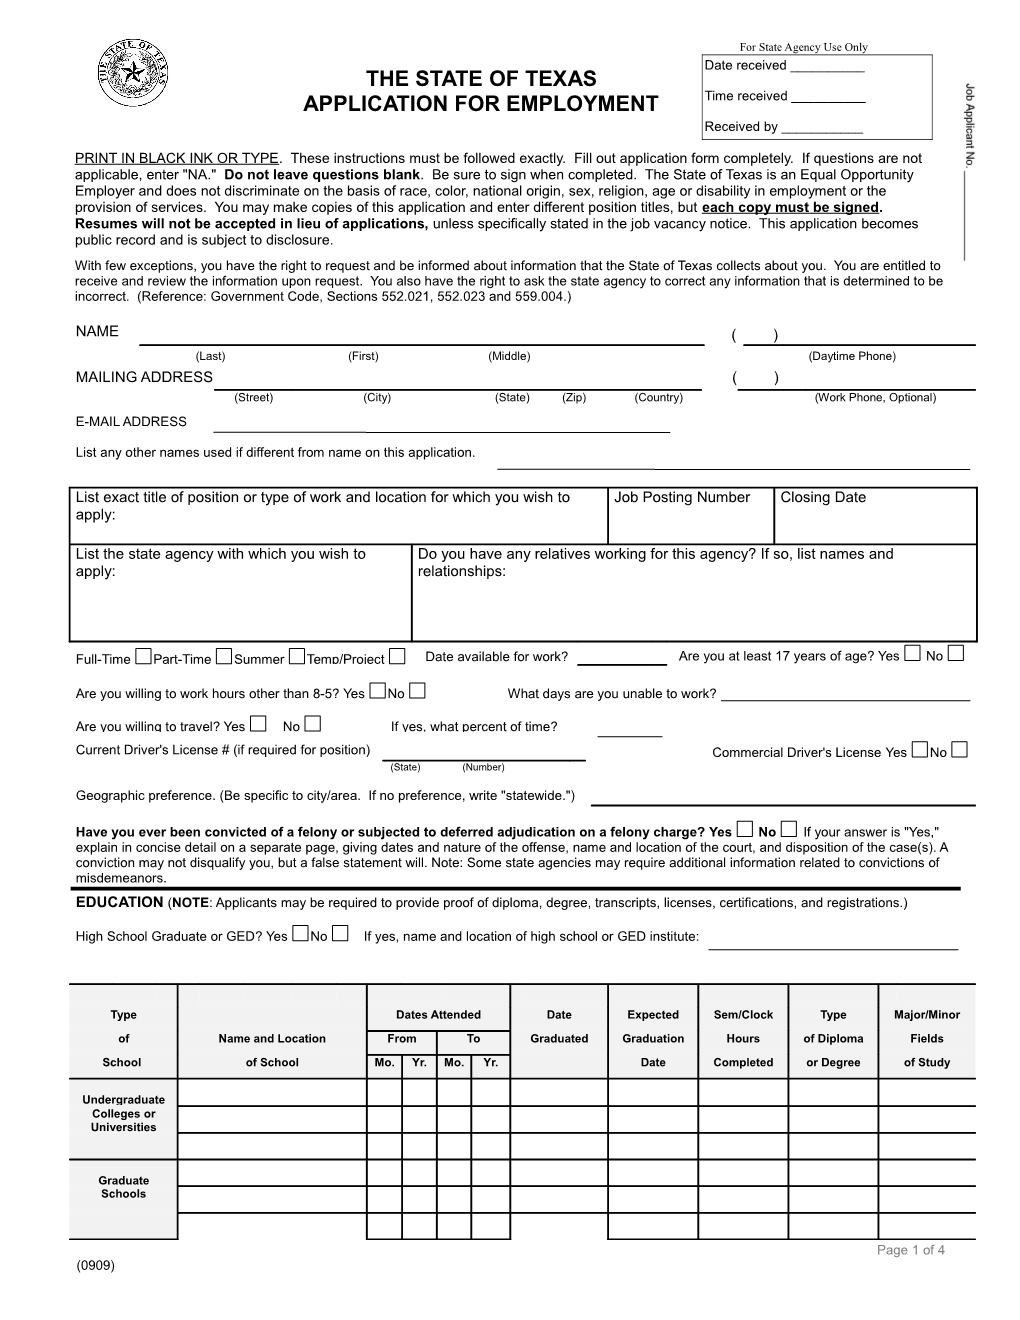 The State of Texas Application for Employment